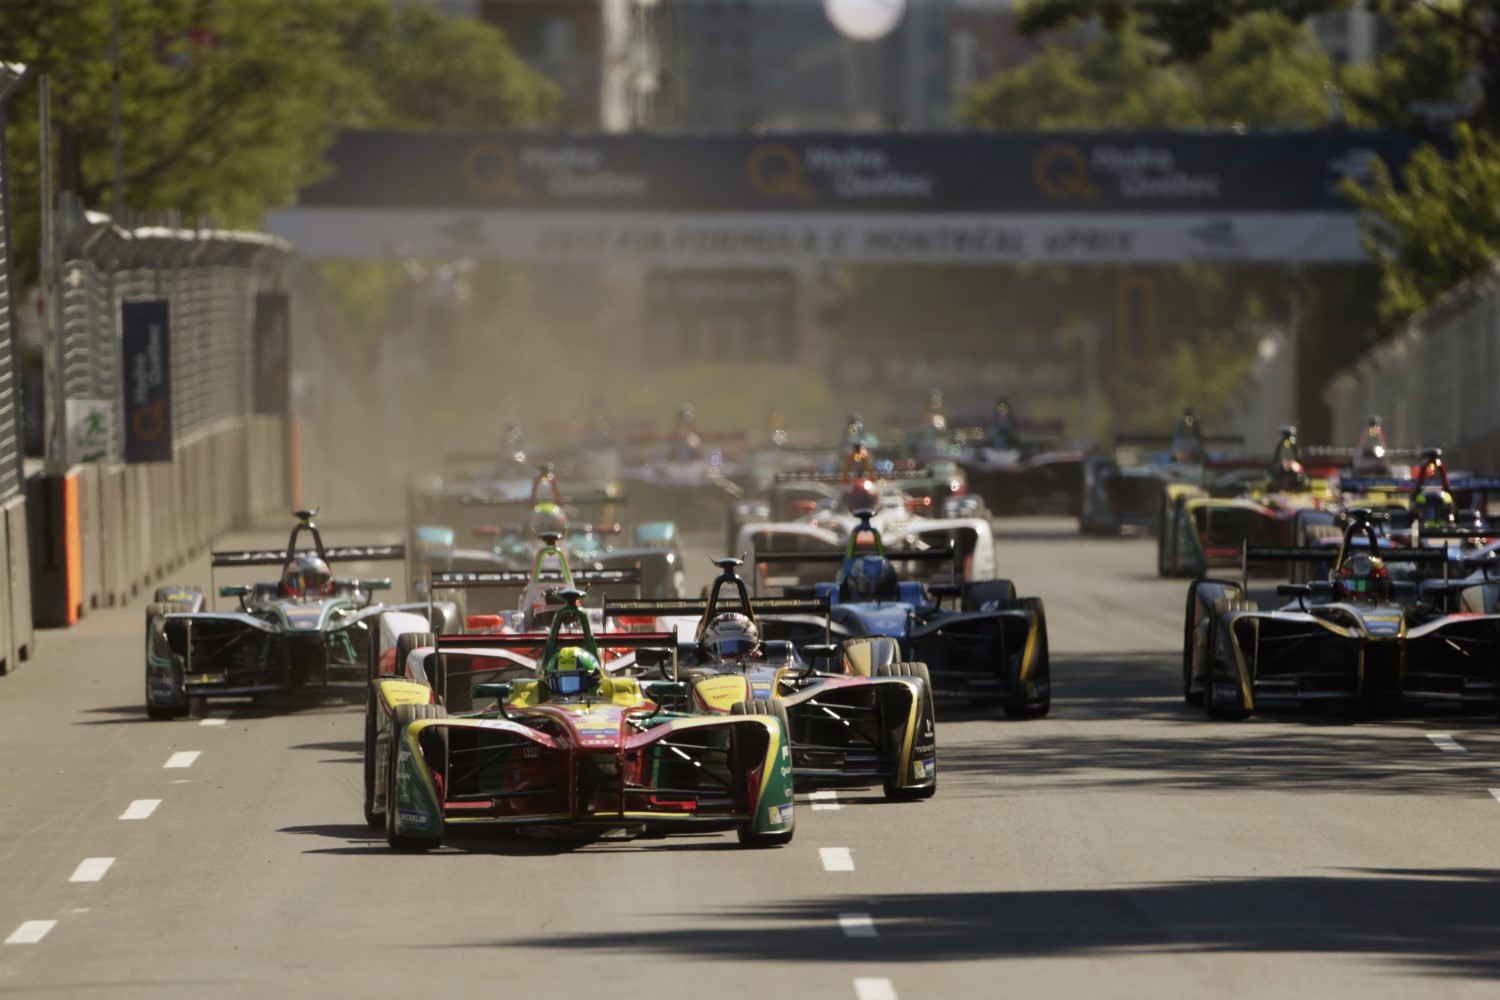 Like many before it, the Montreal Formula E race is a financial disaster